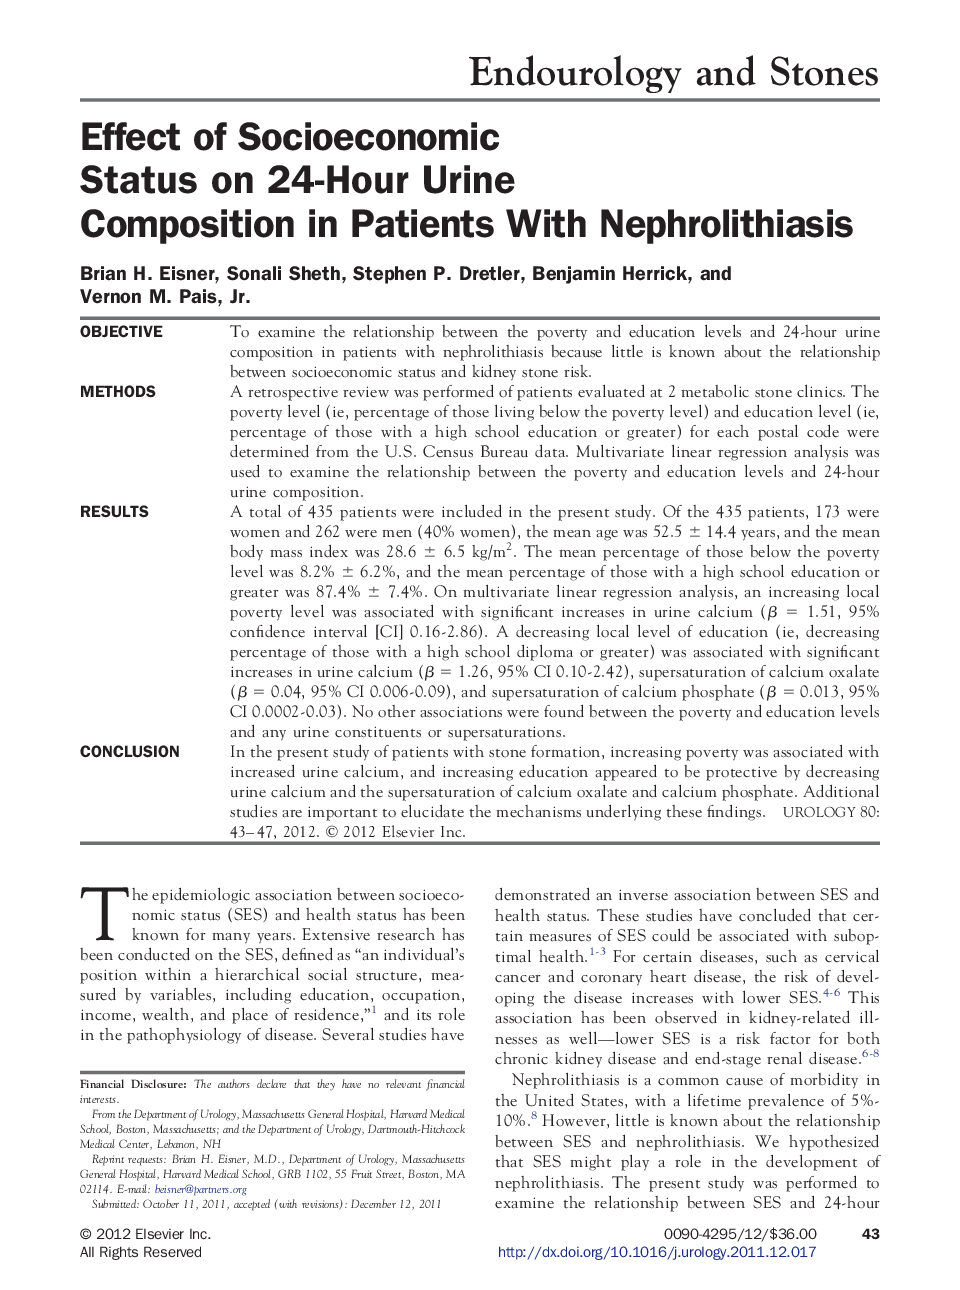 Effect of Socioeconomic Status on 24-Hour Urine Composition in Patients With Nephrolithiasis 